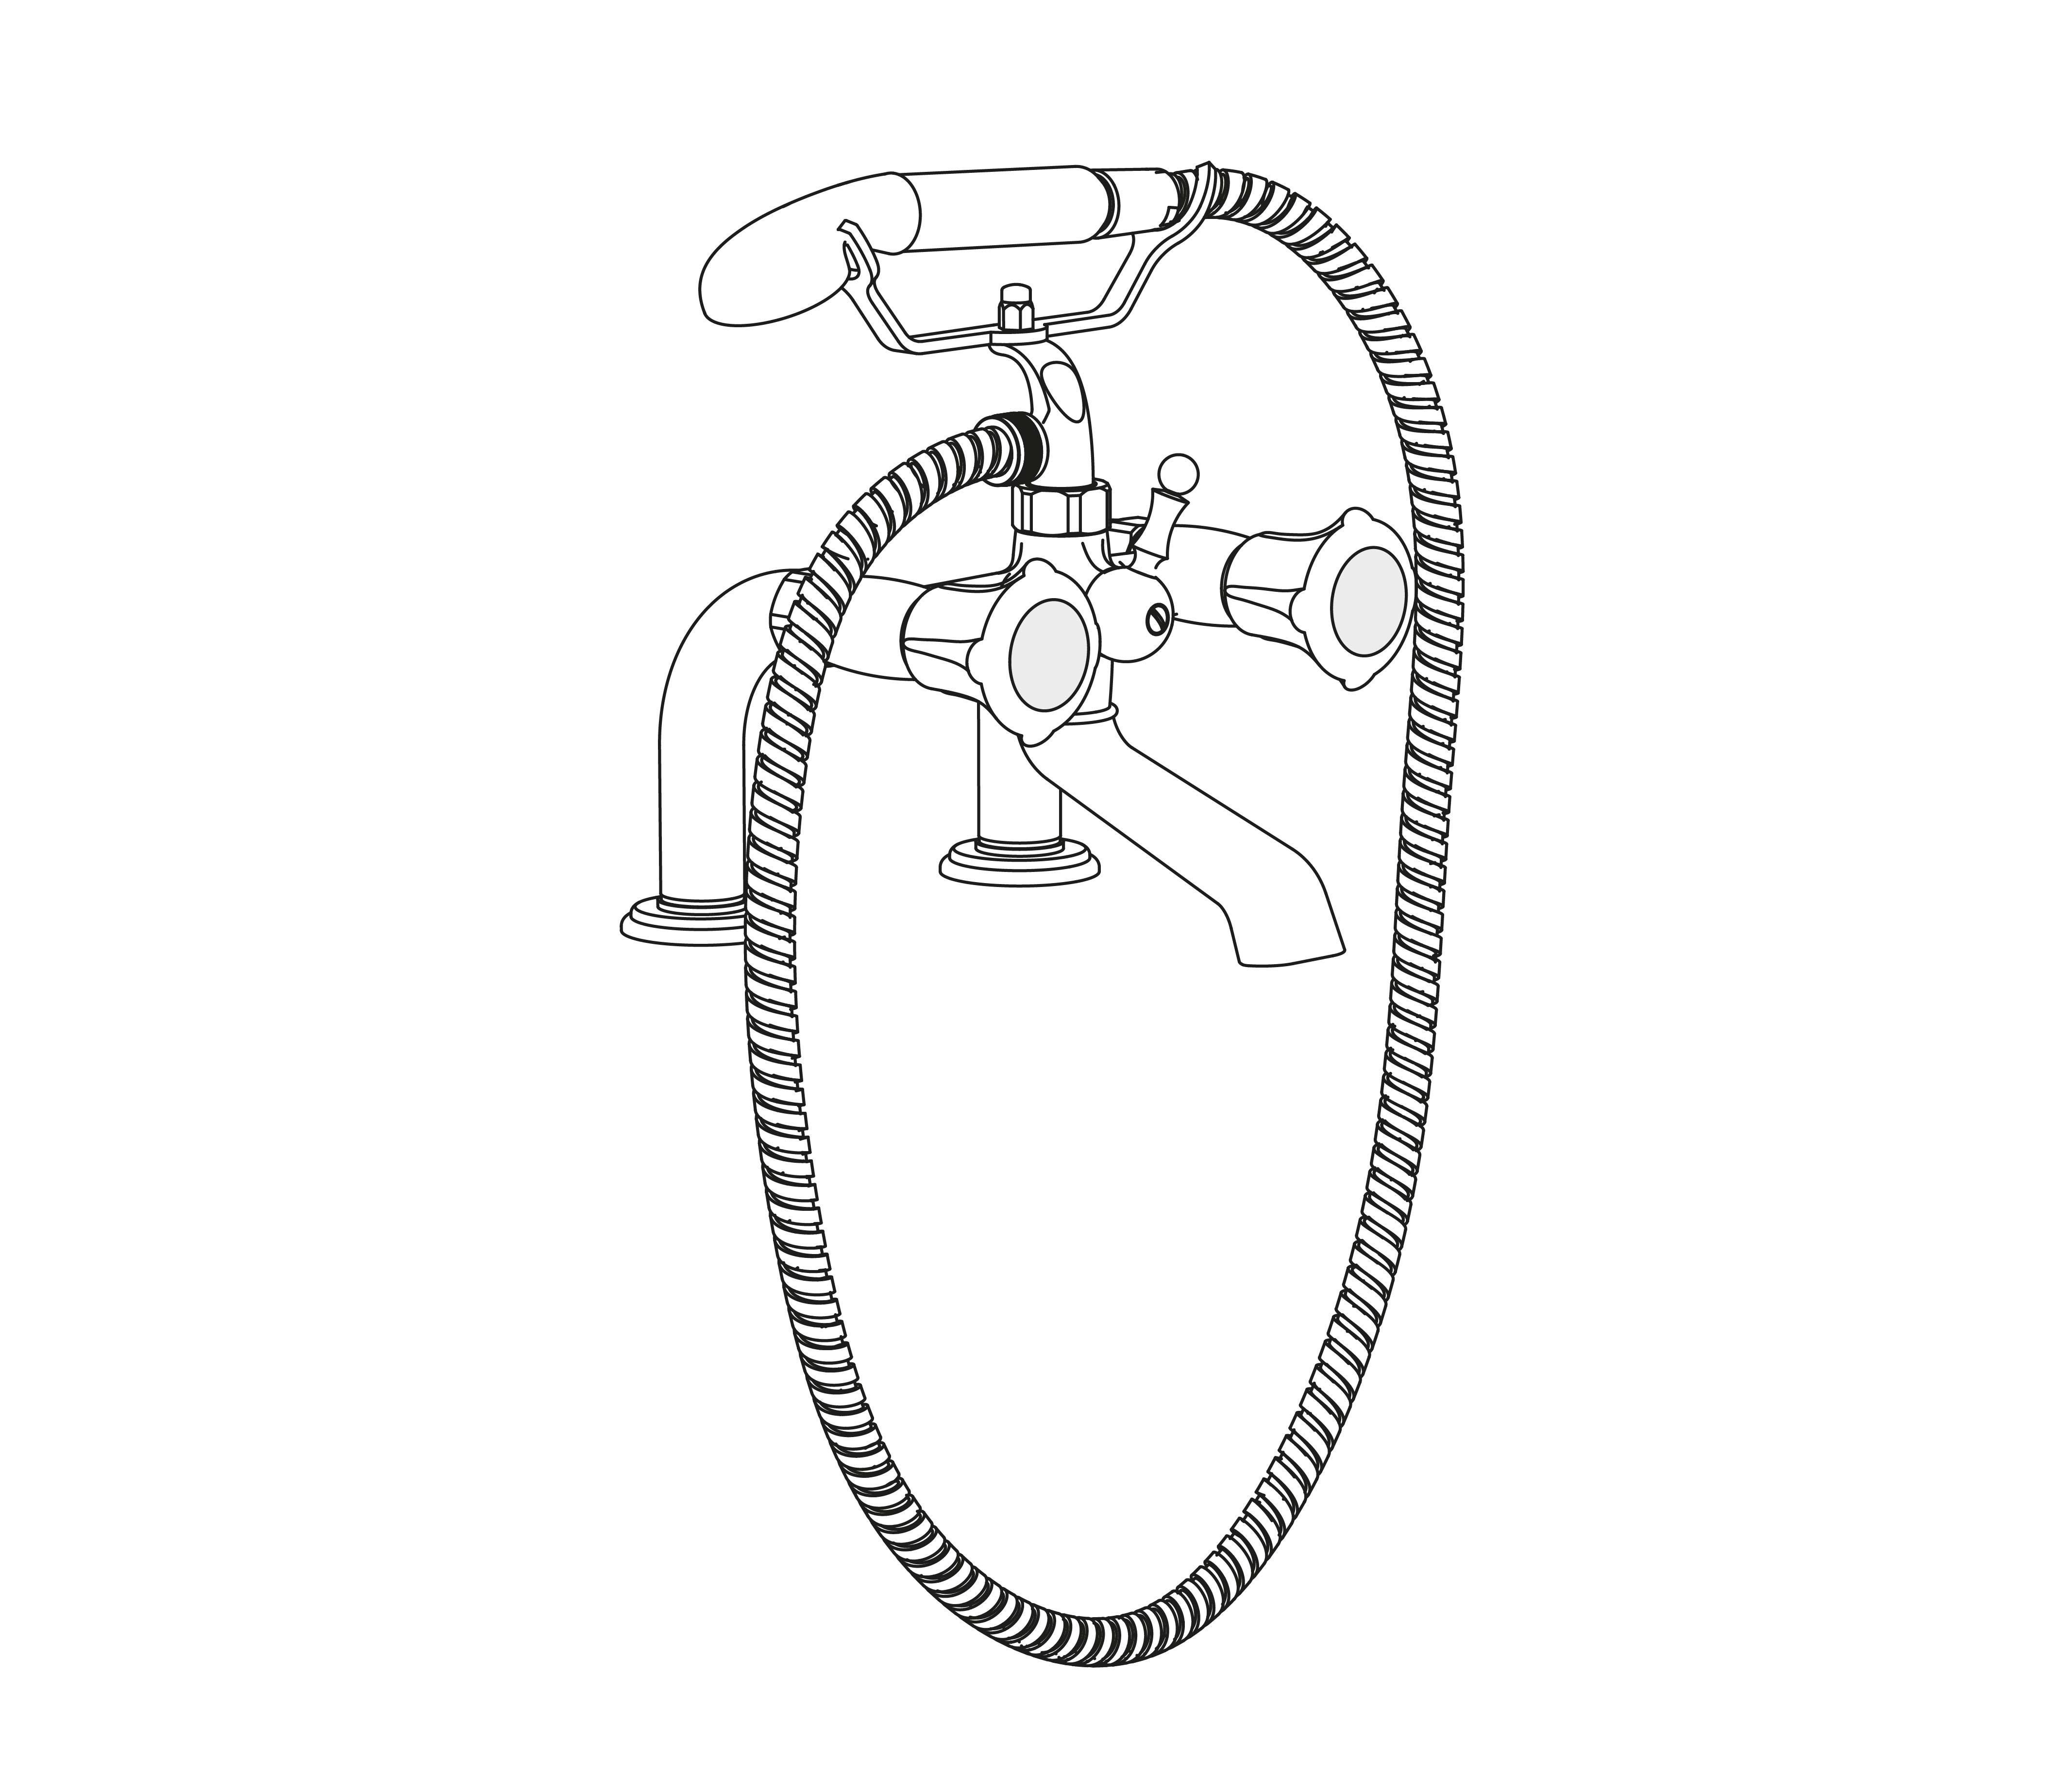 S82-3306 Rim mounted bath and shower mixer